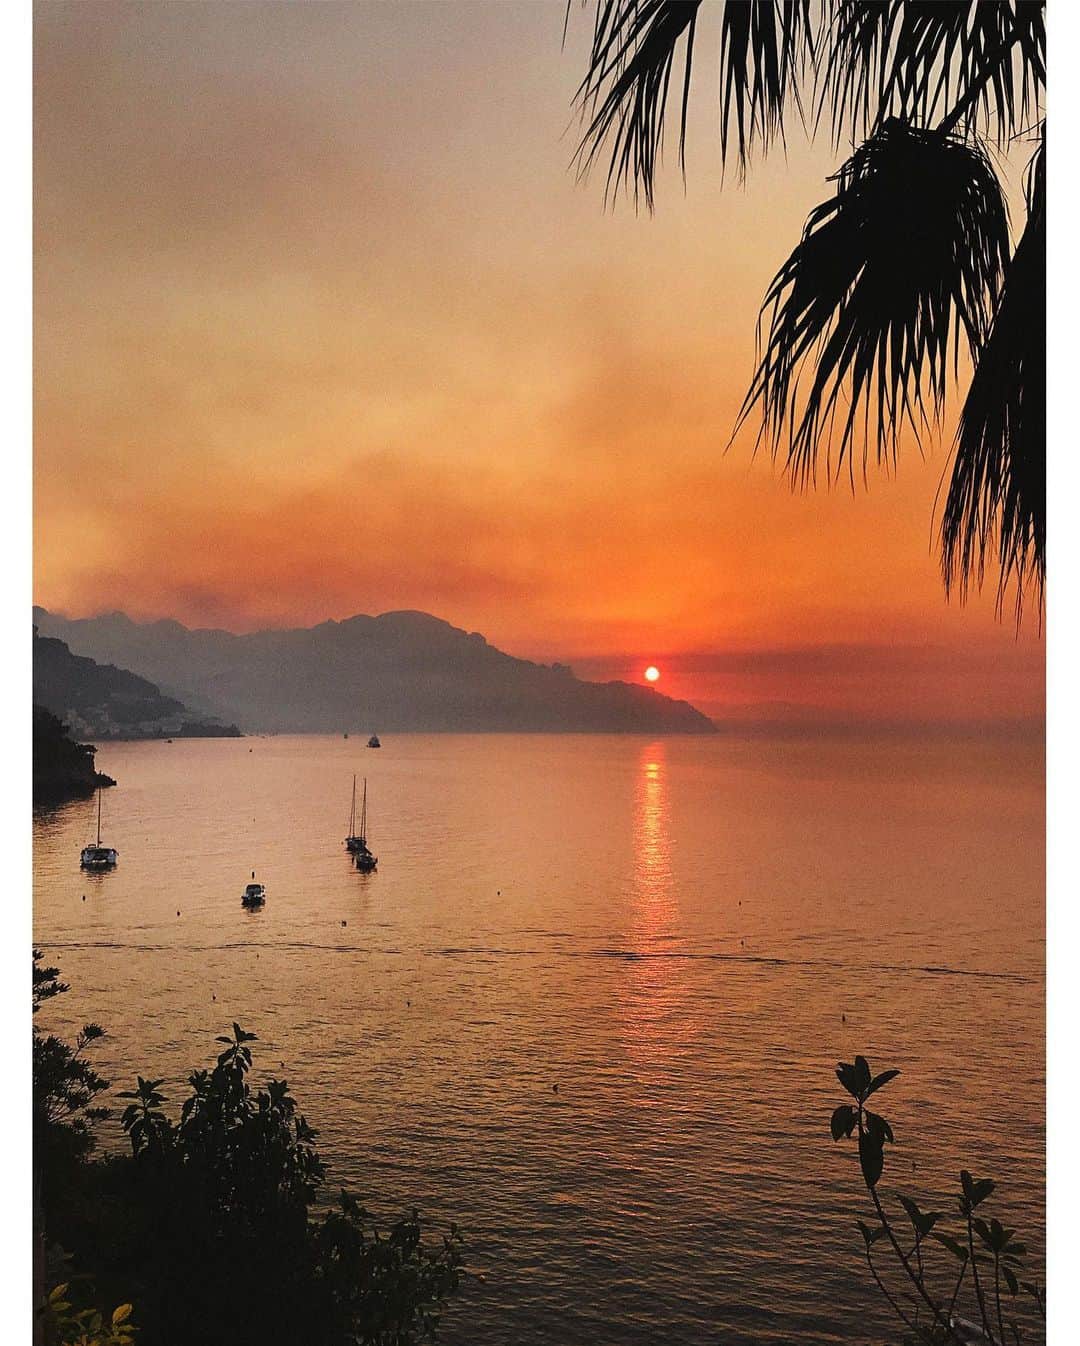 マリオ・テスティーノさんのインスタグラム写真 - (マリオ・テスティーノInstagram)「ON SALE NOW: Sunset 1, Rio de Janeiro, 2017.  This Limited edition print from the new series ‘Sunrises & Sunsets’ is on sale via the link in bio. ⁣ ⁣ As a photographer, I have realised nothing inspires me more than light.  I spend all my time checking to see if the light is beautiful or not. For me, the most impressive light is always daylight and the most magical moments are when the sun rises in the morning and when it sets again at dusk.  I have been fortunate to document these moments around the world and am happy to present them here for my Instagram followers, and for the first time make them available to purchase. I hope you enjoy them as much as I do. ⁣ -⁣ EN  VENTA AHORA: Me he dado cuenta de que, como fotógrafo, nada me inspira más que la luz. Siempre estoy mirando si la luz es hermosa o no. La luz más impresionante para mí es siempre la luz del día y los momentos más mágicos son cuando sale el sol por la mañana y cuando se pone al atardecer. Tuve la suerte de documentar estos momentos en todo el mundo y estoy feliz de presentarlos aquí para mis seguidores de Instagram; además de que, por primera vez, estén disponibles para compra. Espero que los disfruten tanto como yo.⁣ -⁣ SUNRISES & SUNSETS SERIES, 2020 ⁣ -⁣ The five prints from the Sunrise & Sunset Series are available to buy at a special introductory price, link in bio.⁣ Please note, framed images are for illustrative purposes only.  ⁣ #SunriseAndSunsetSeries #Sunset #Sunrise #TestinoLight #Rio #Brazil #MarioTestino⁣ ⁣」7月1日 22時32分 - mariotestino